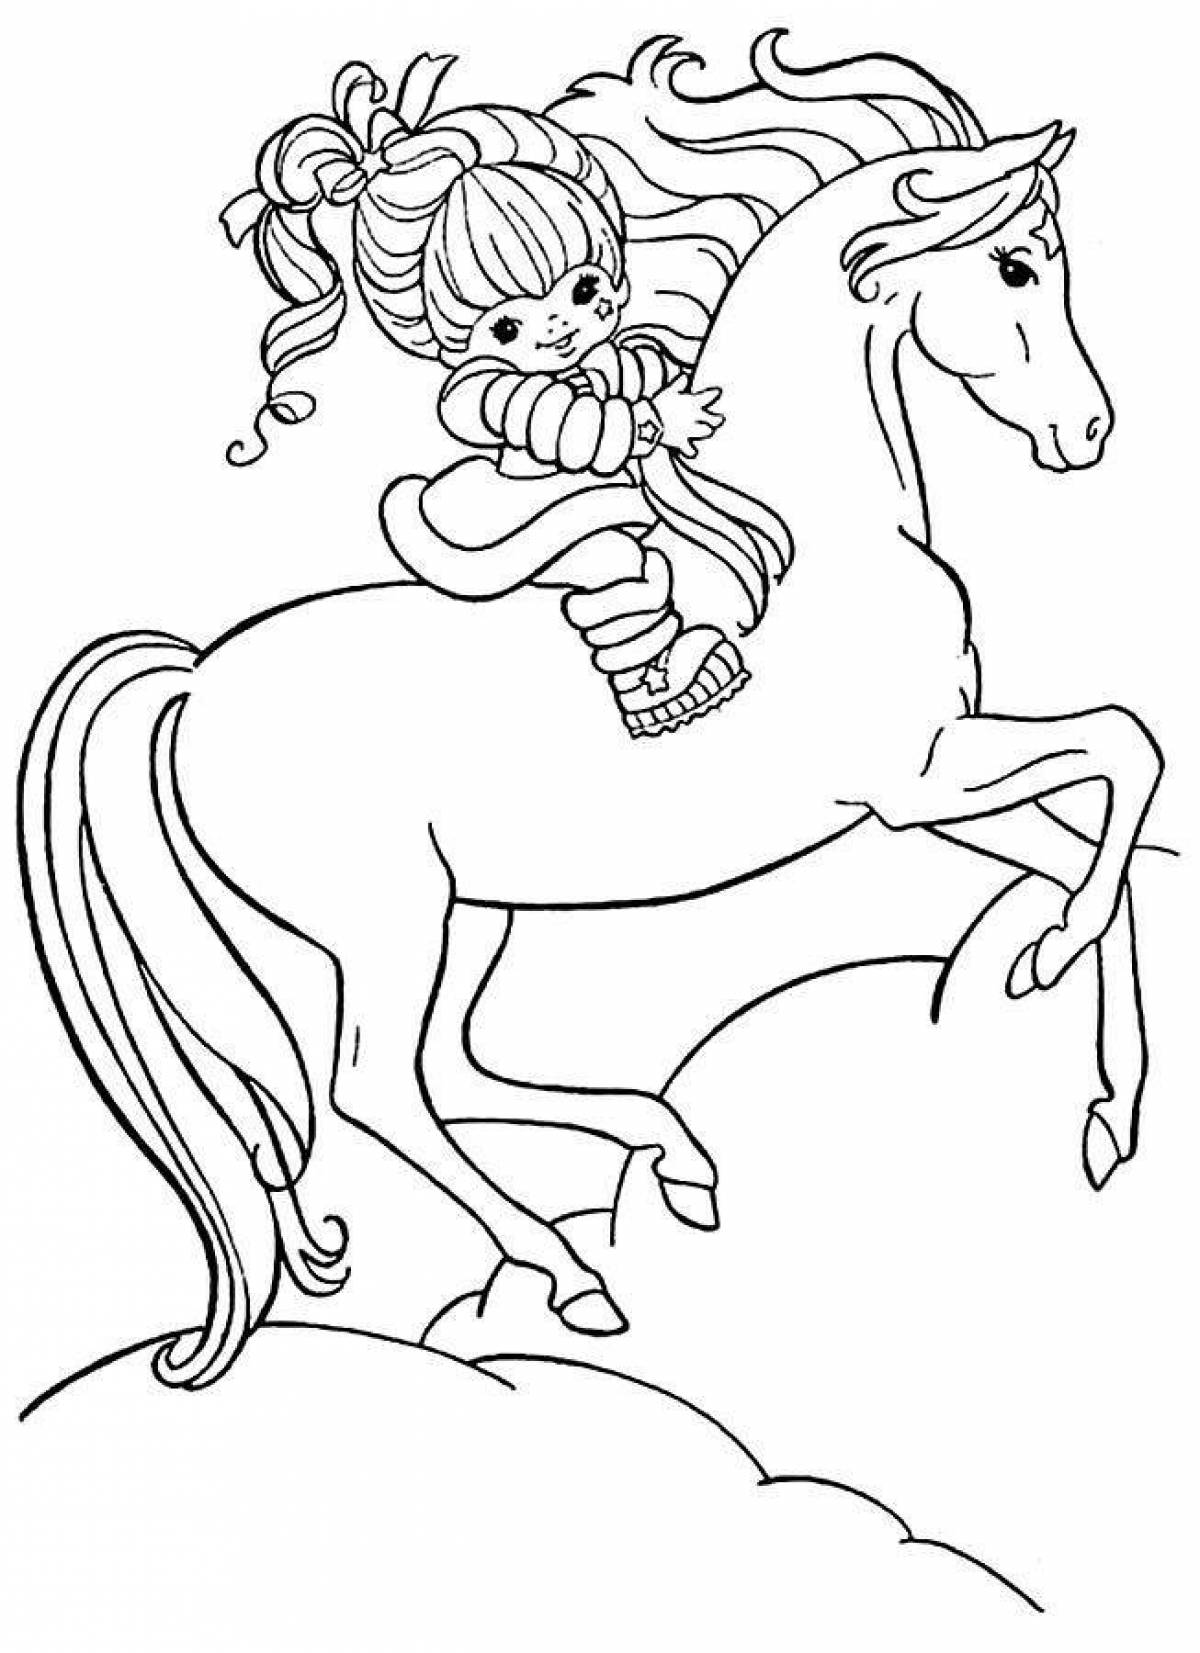 Great horse coloring book for girls